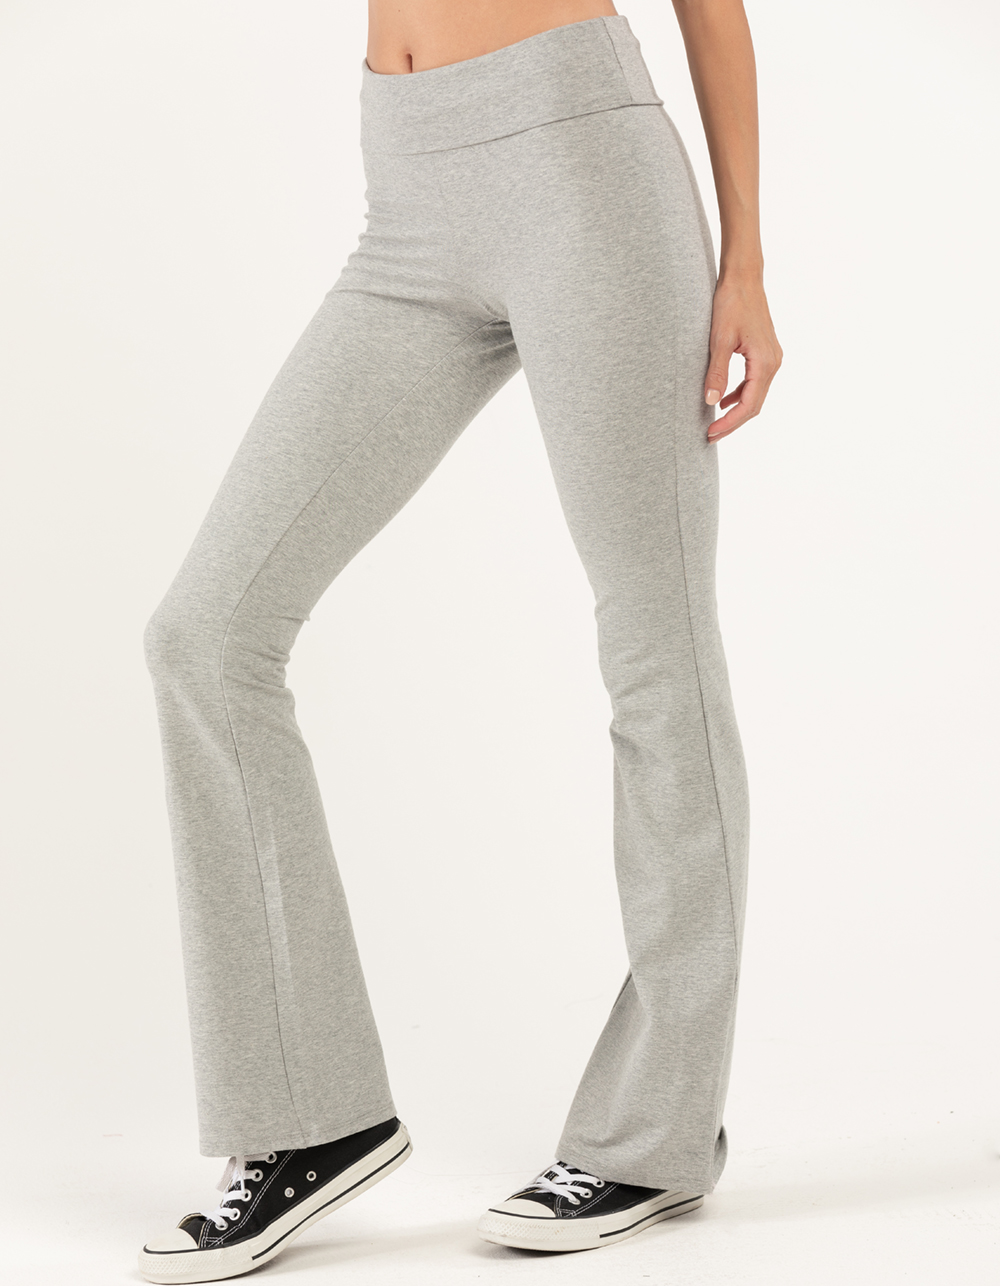 Pro-Technical Flared Leggings - Light Heather Gray – My Outfit Online